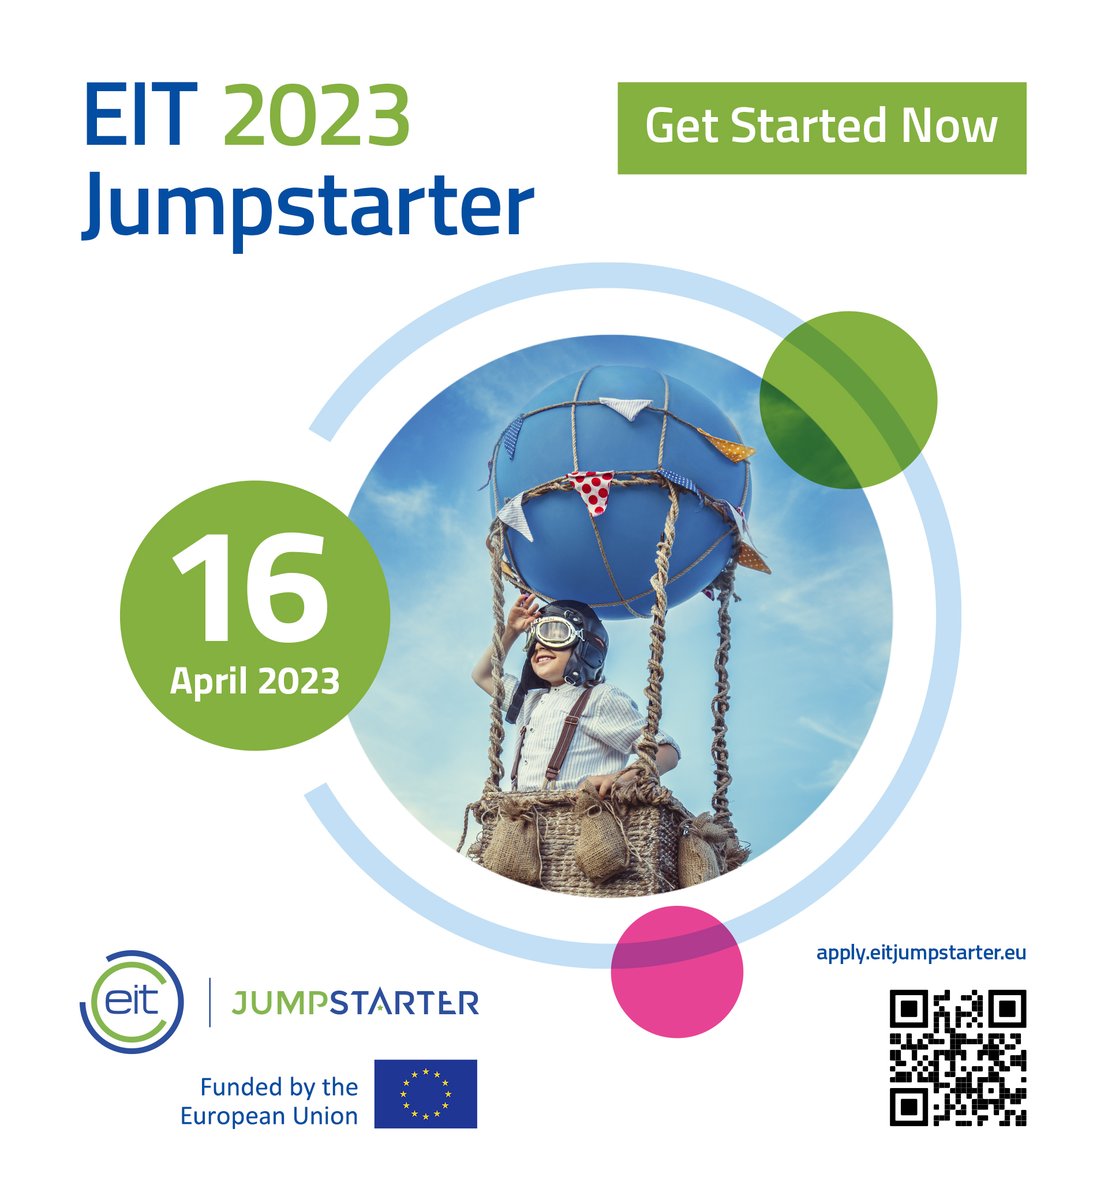 🏆The best teams participating in #bootcamps will have a chance to take part in the Grand Finals organized in Autumn 2023.
Teams will be competing for a prize of up to EUR 10,000! 💸
Learn more about #EITJumpstarter and apply 👉 eitjumpstarter.eu